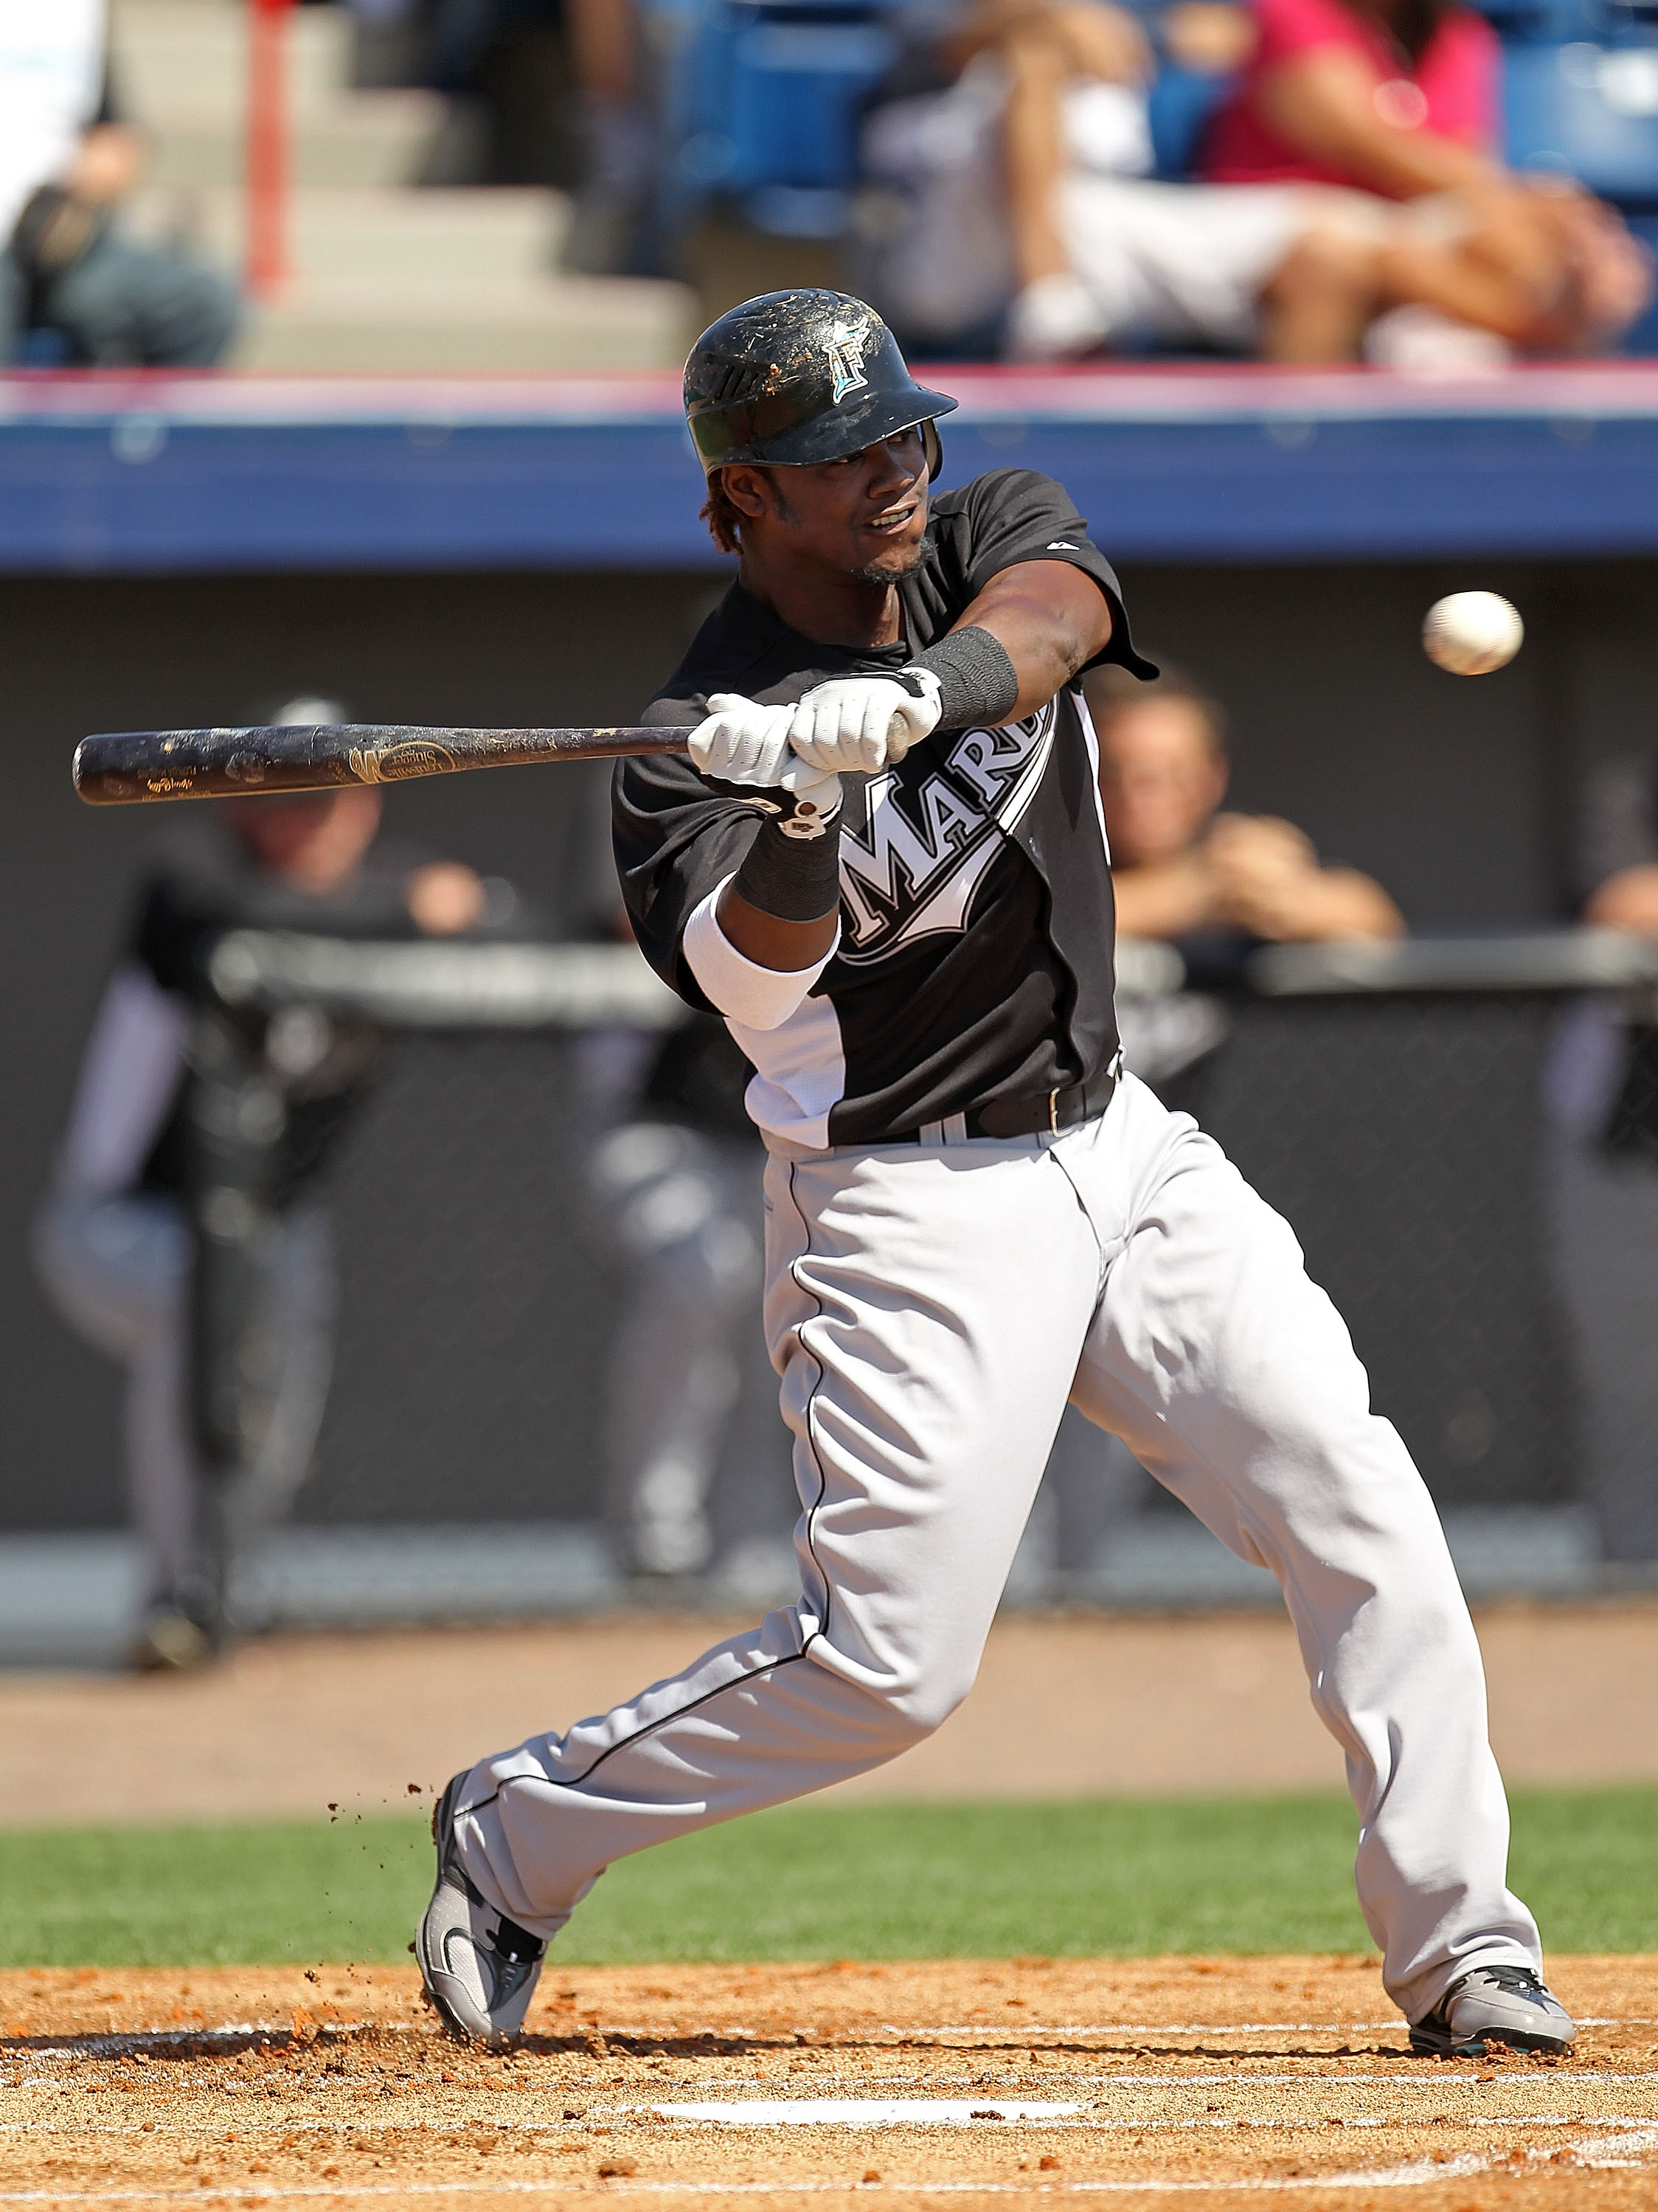 VIERA, FL - MARCH 02:  Hanley Ramirez #2 of the Florida Marlins bats during a Spring Training game against the Washington Nationals at Space Coast Stadium on March 2, 2011 in Viera, Florida.  (Photo by Mike Ehrmann/Getty Images)